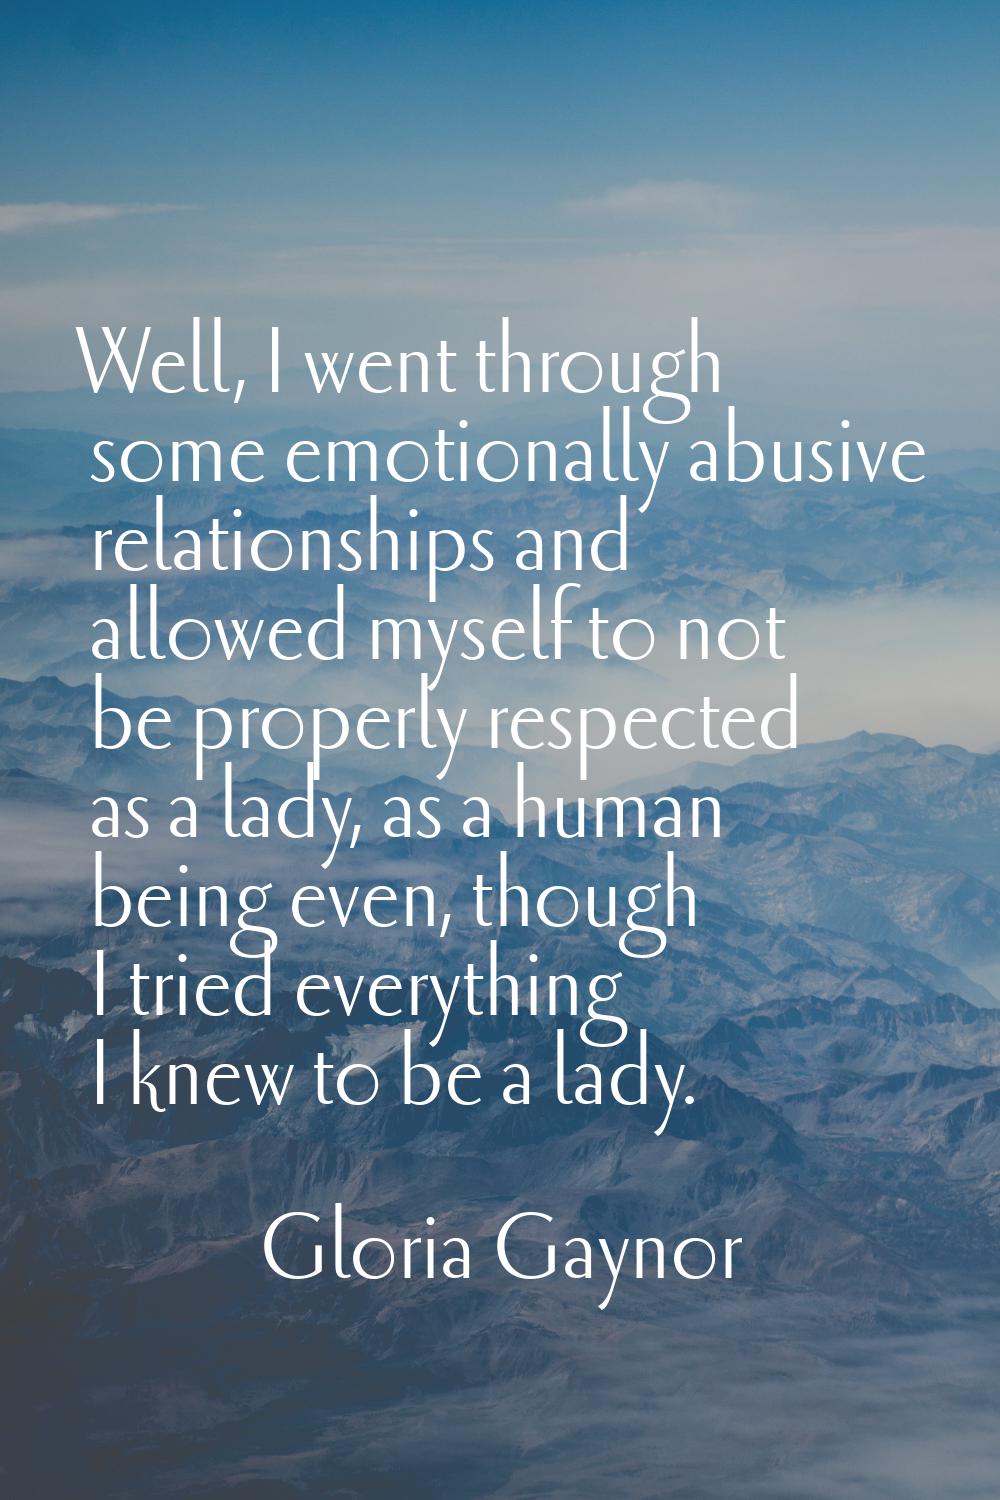 Well, I went through some emotionally abusive relationships and allowed myself to not be properly r